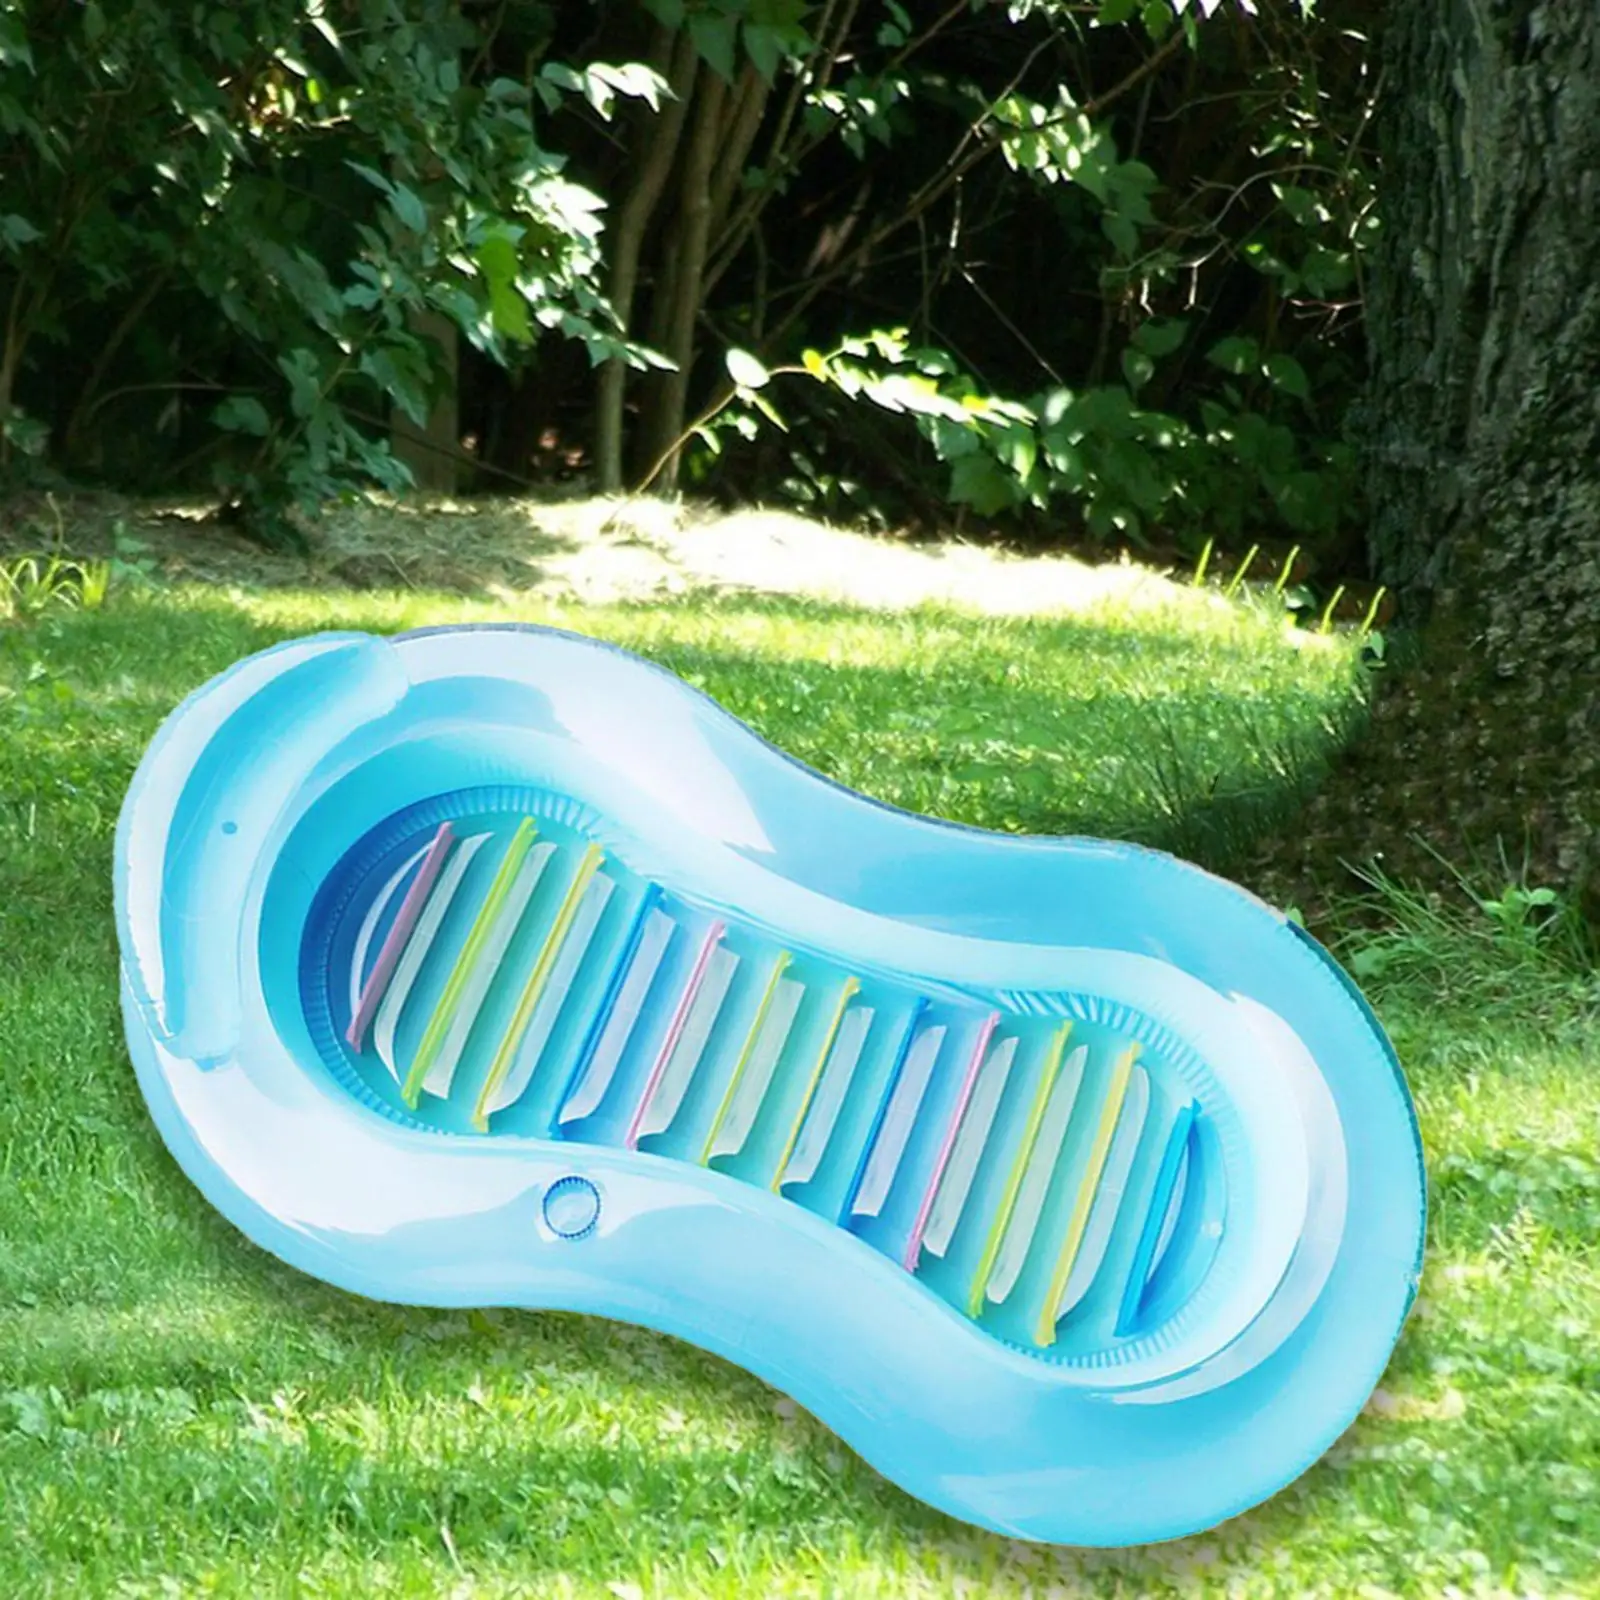 PVC Pool Floats Hammock Inflatable Lounge Chair Pool Floats for Beach